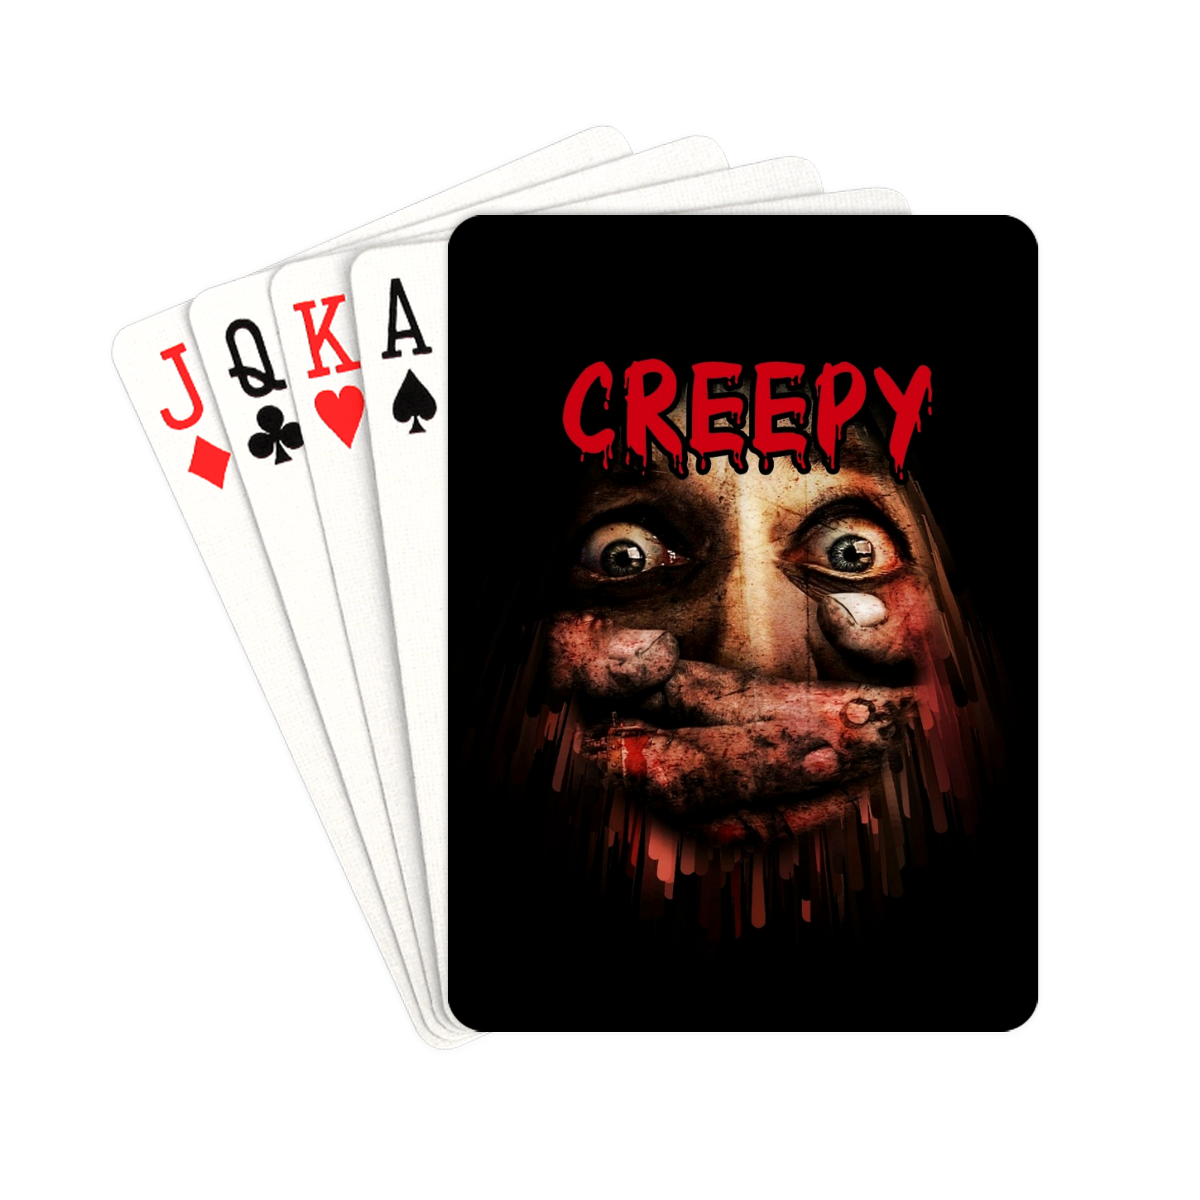 Creepy by Artdream Playing Cards 2.5"x3.5"